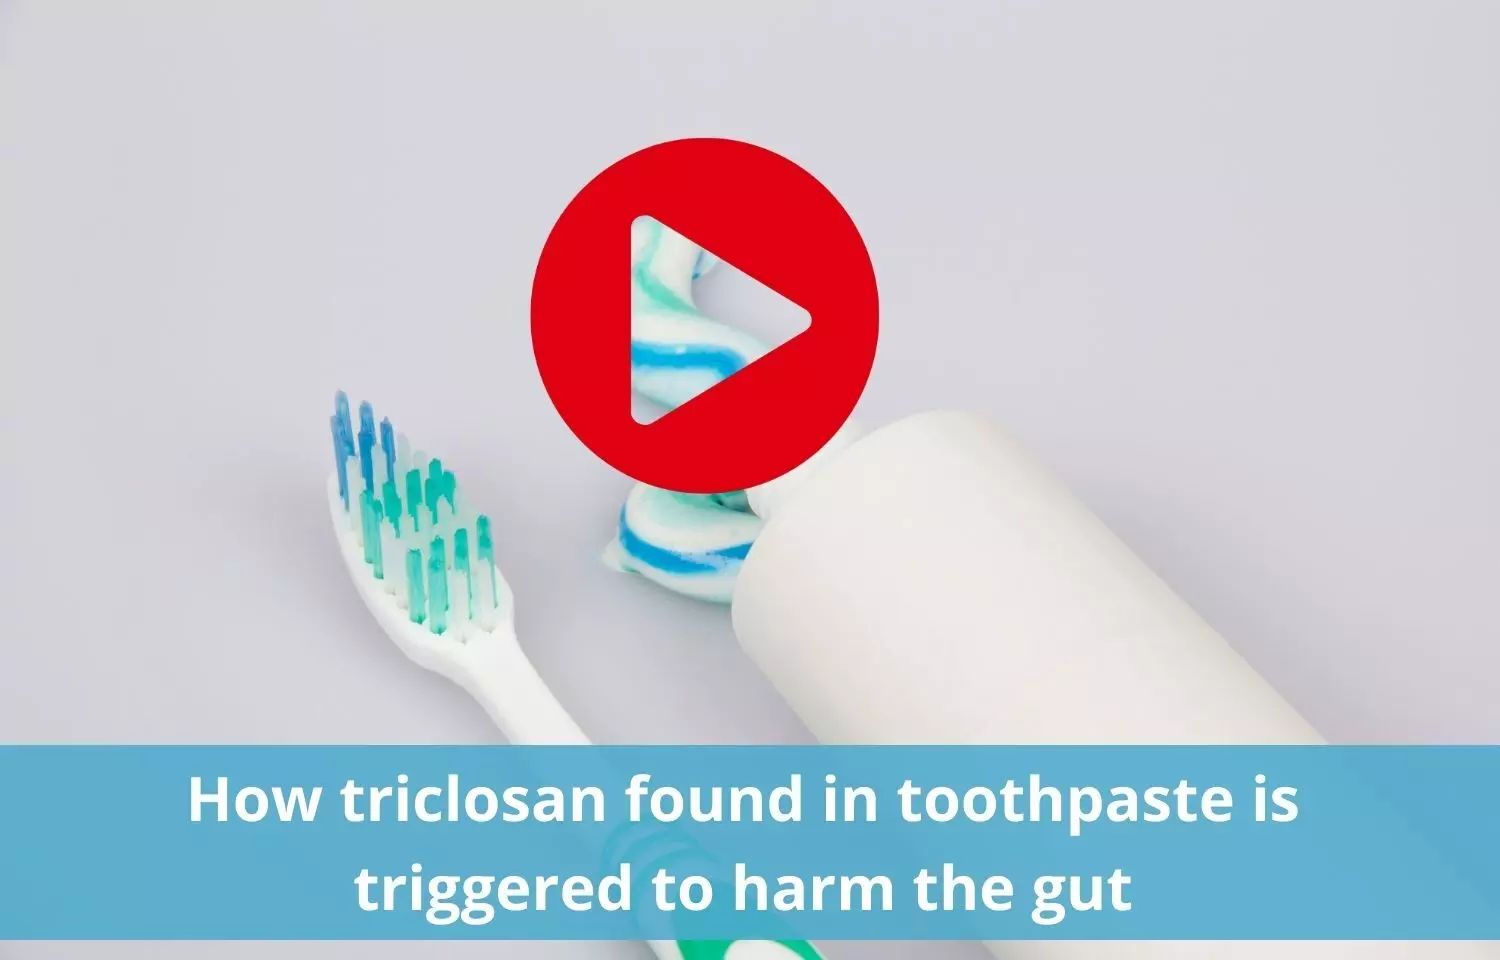 Triclosan In Toothpaste, is harmful for gut and triggers inflammation